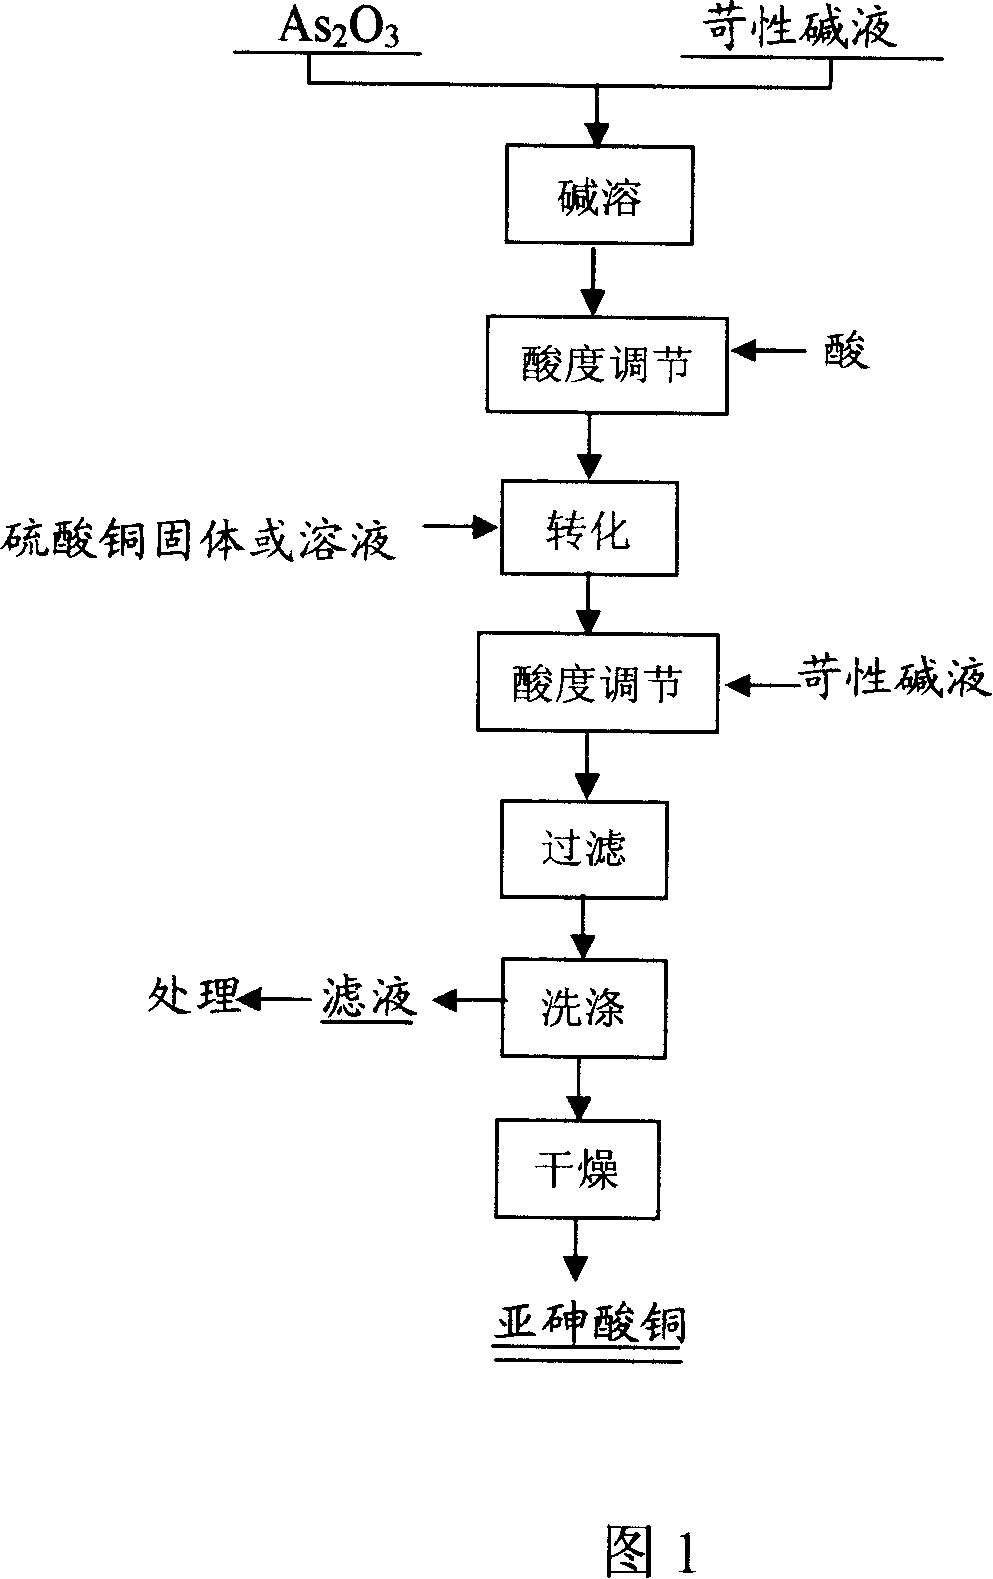 Manufacture of copper arsenite and application of the same